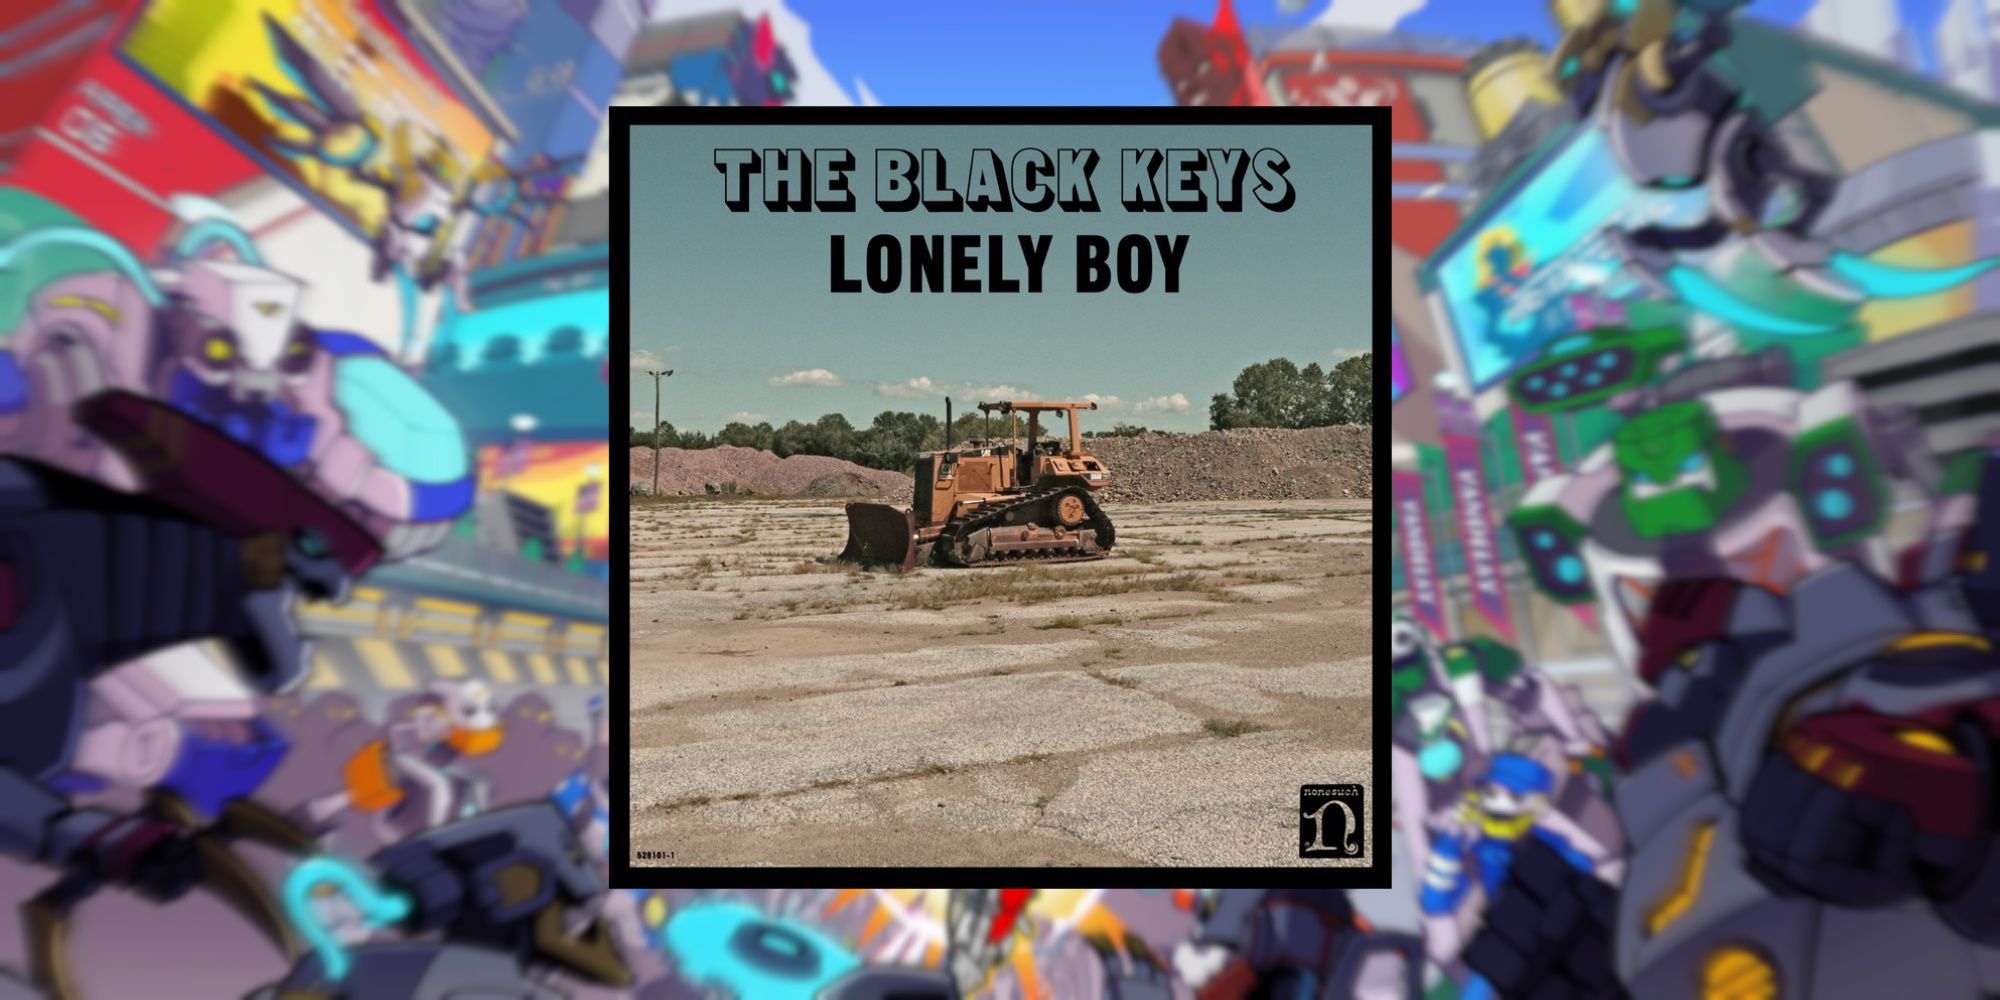 The album cover for Lonely boy